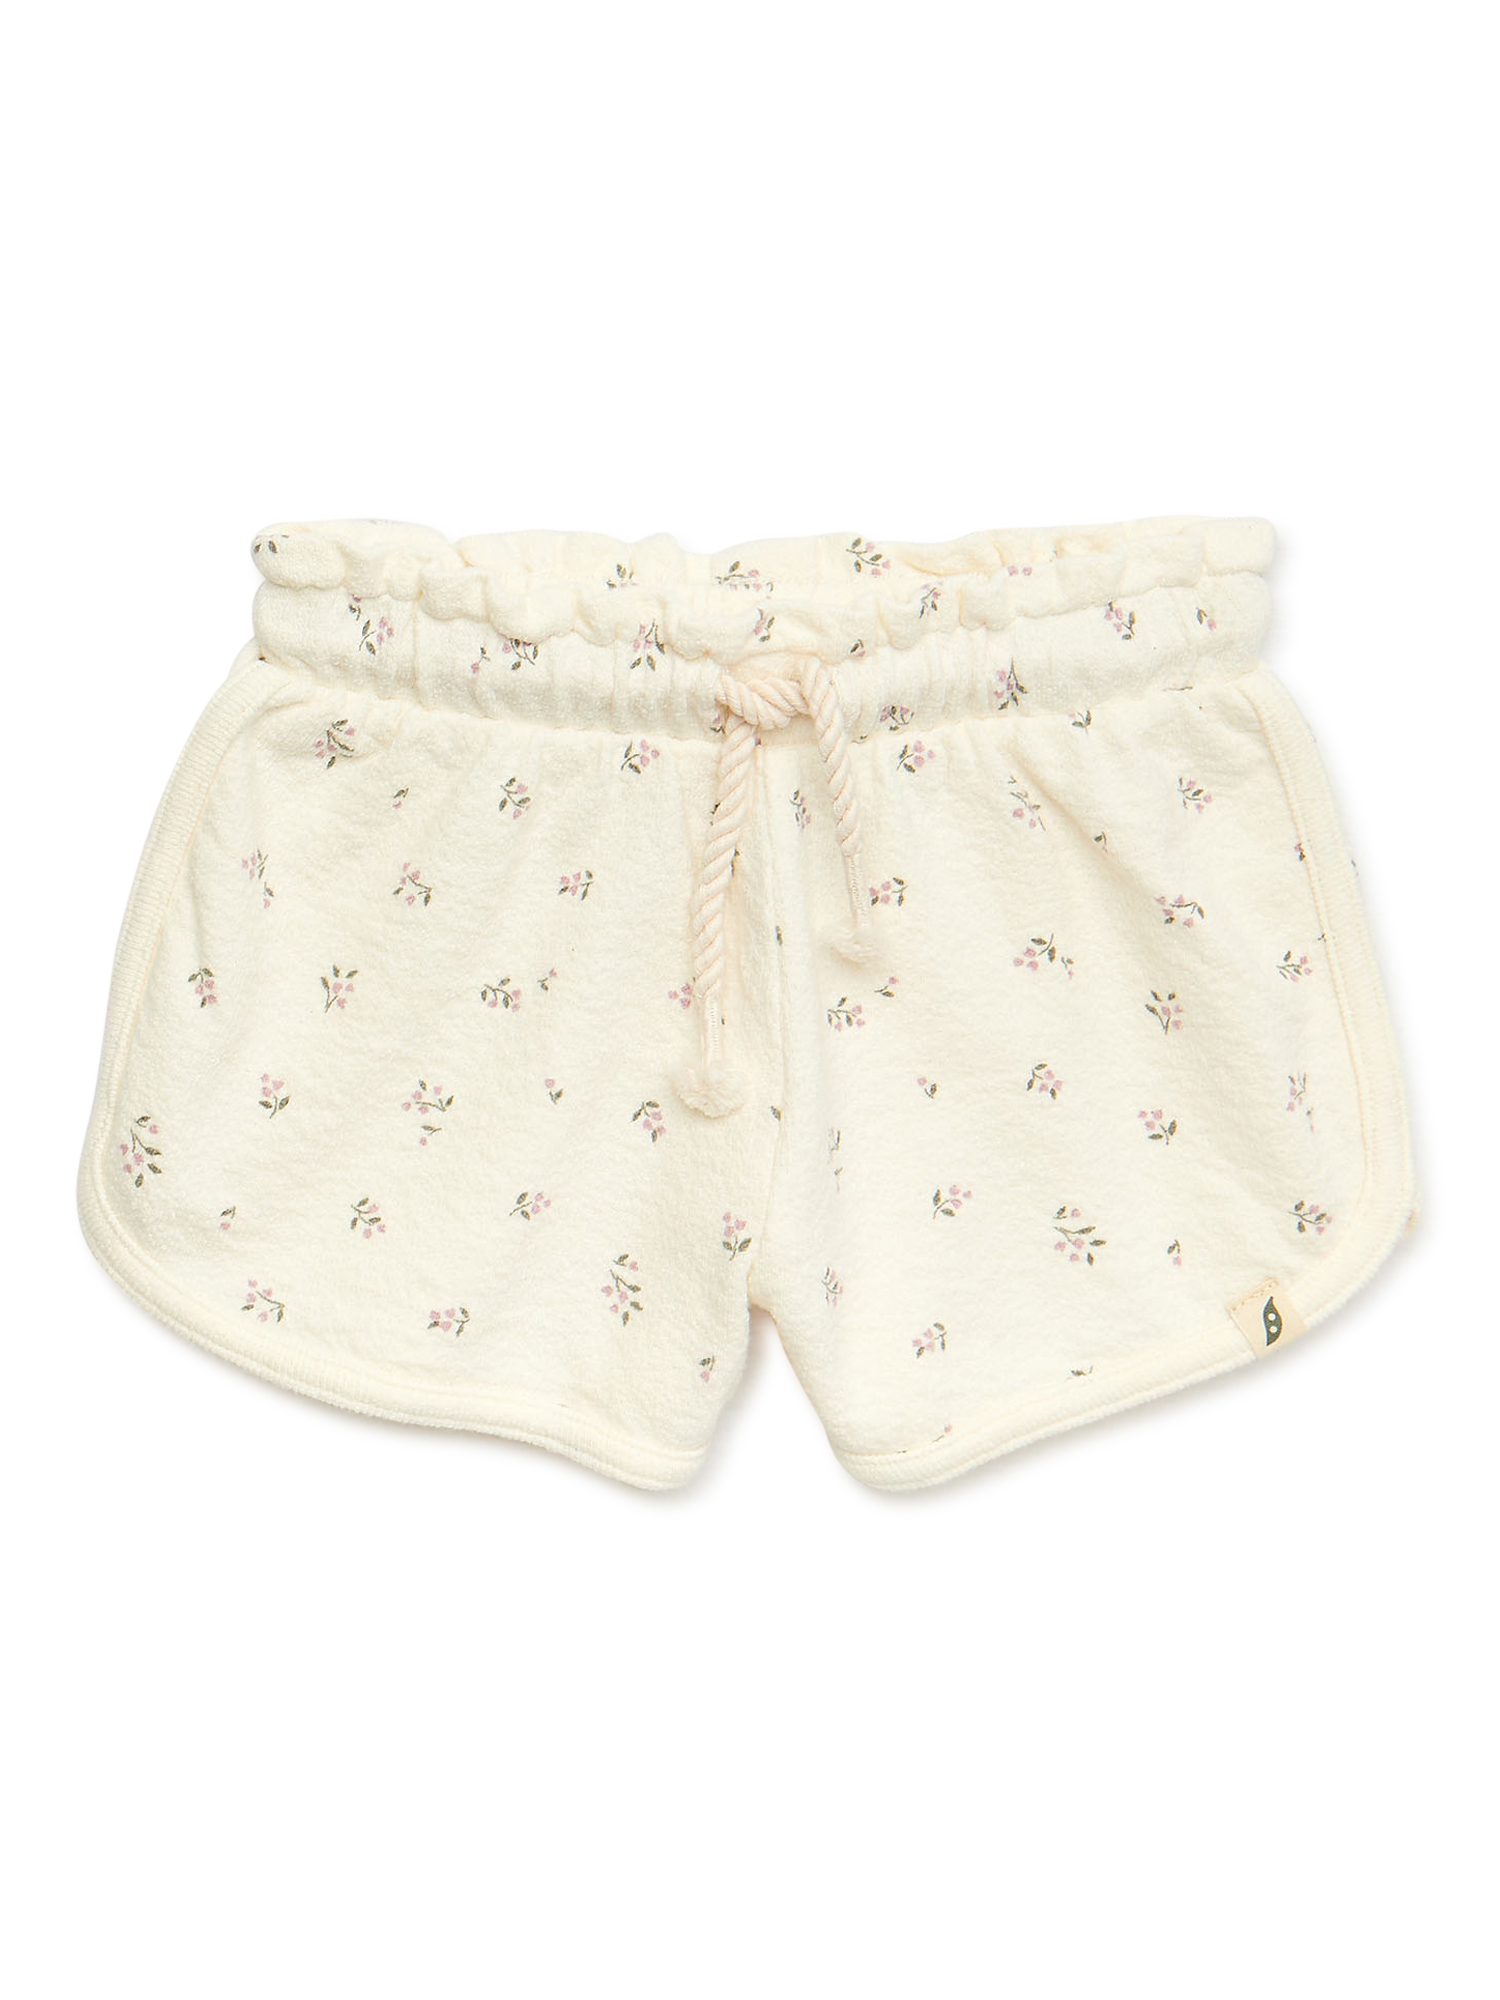 easy-peasy Toddler Girls Pull On Knit Shorts, Sizes 12M-5T - image 1 of 3